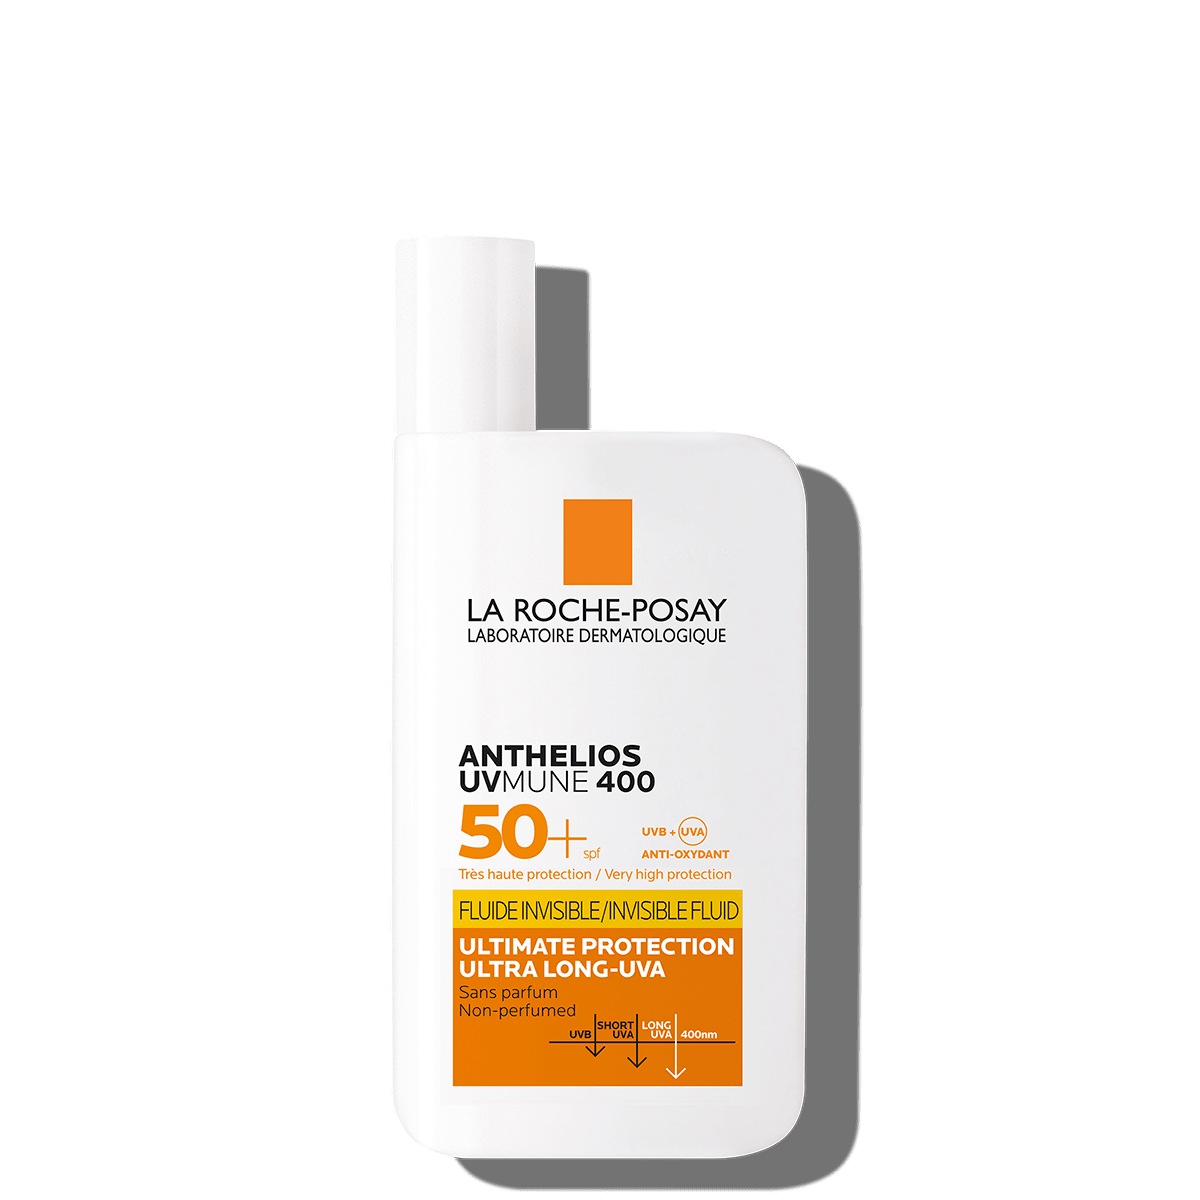 lrp-ProductPage-Sun-Anthelios-UVMune400-Fluid-SP-spf50+-3337875797597-front.png